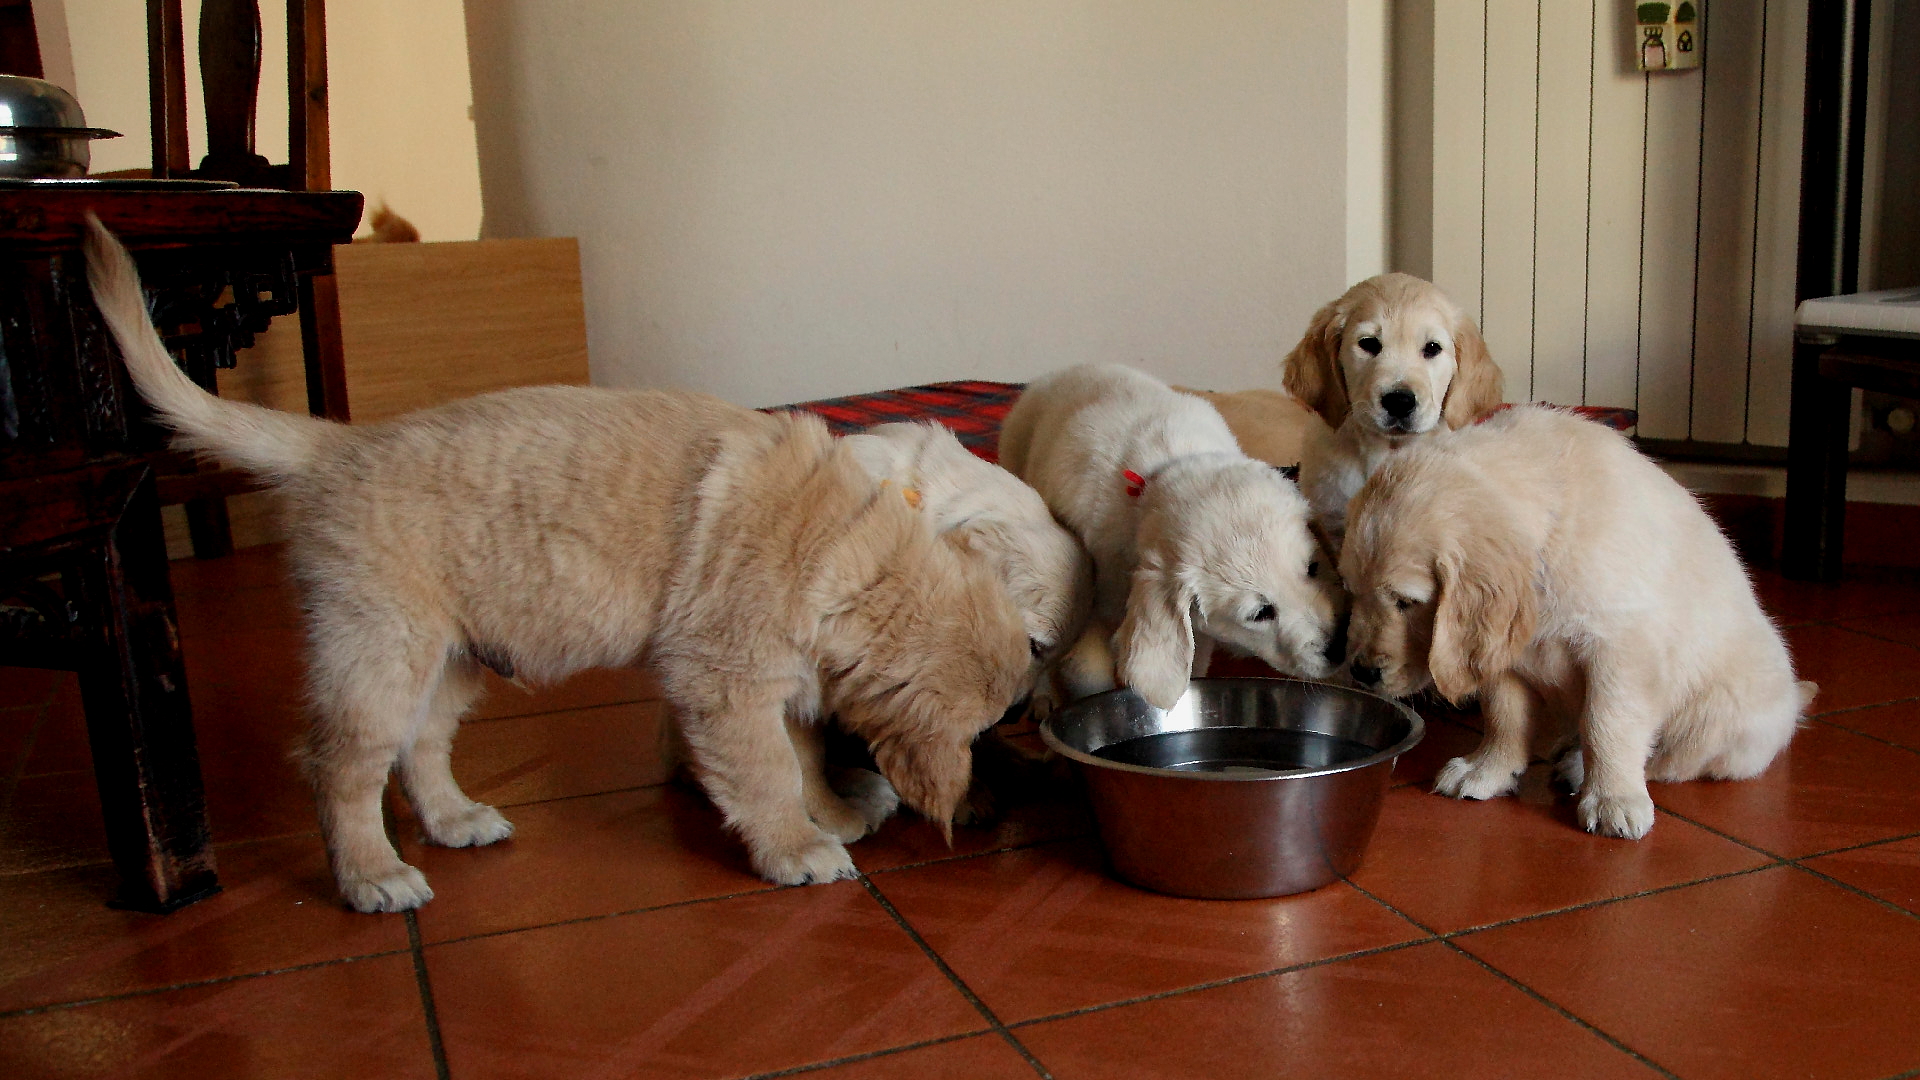 the three dogs are drinking water out of the same bowl